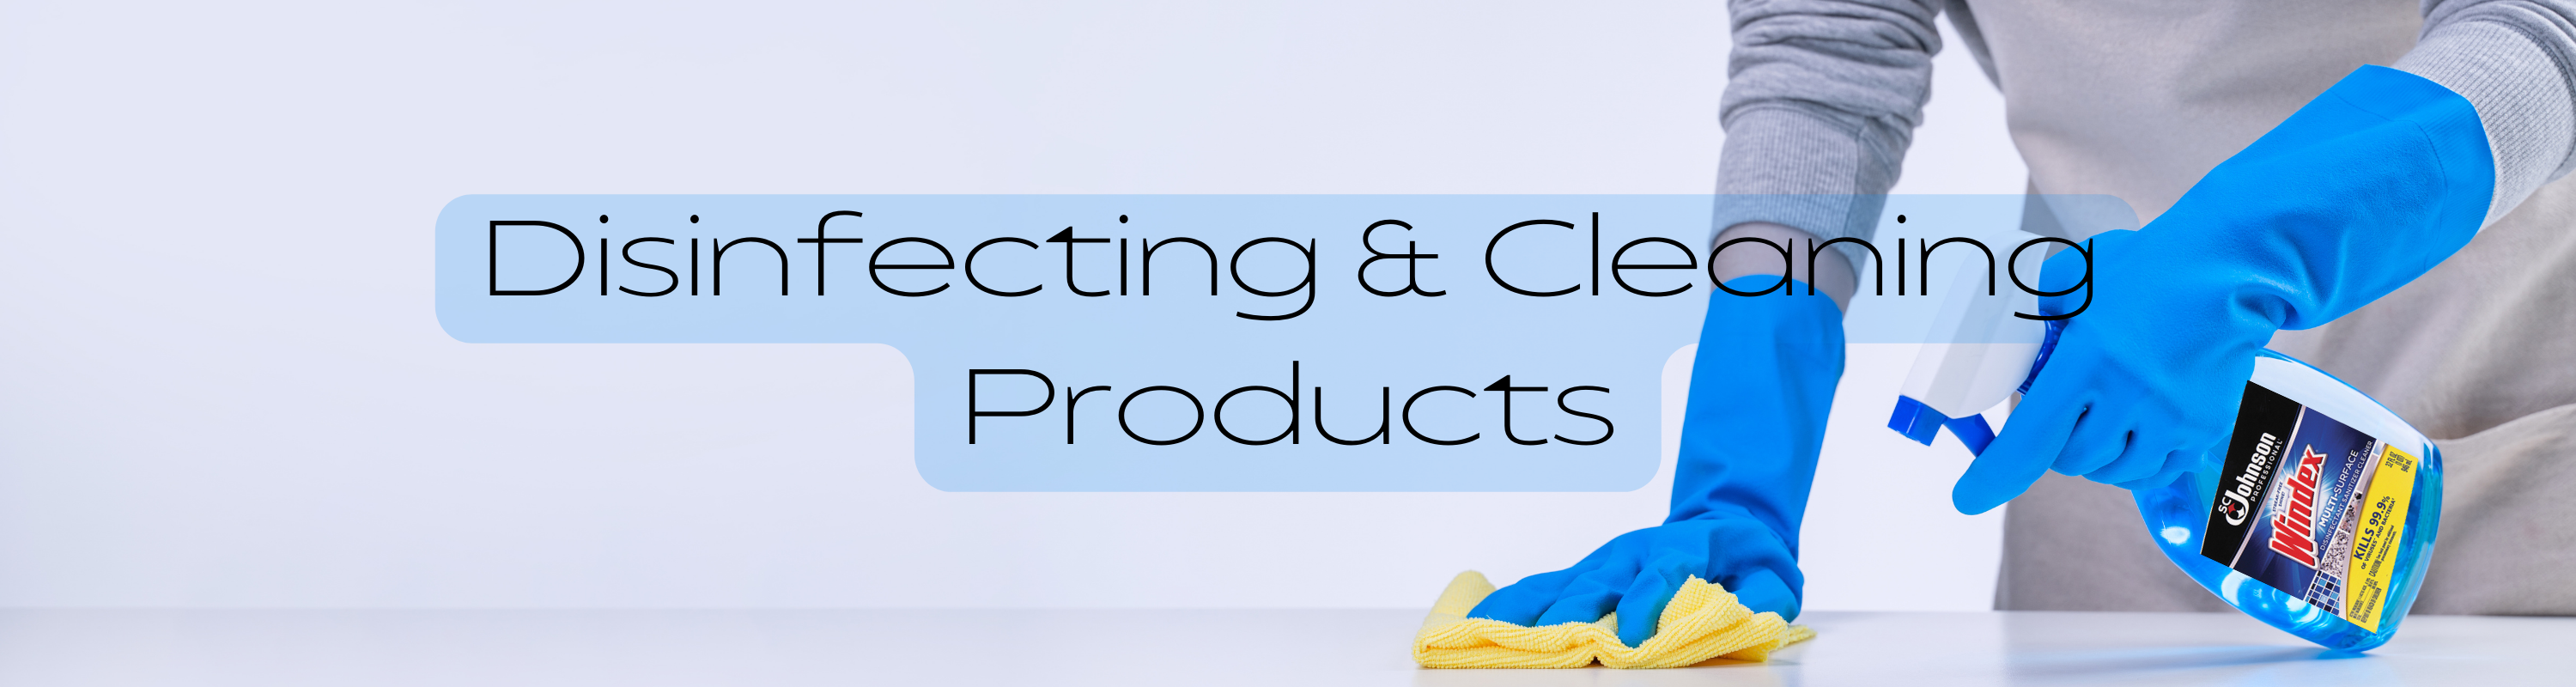 Disinfection & Cleaning Banner